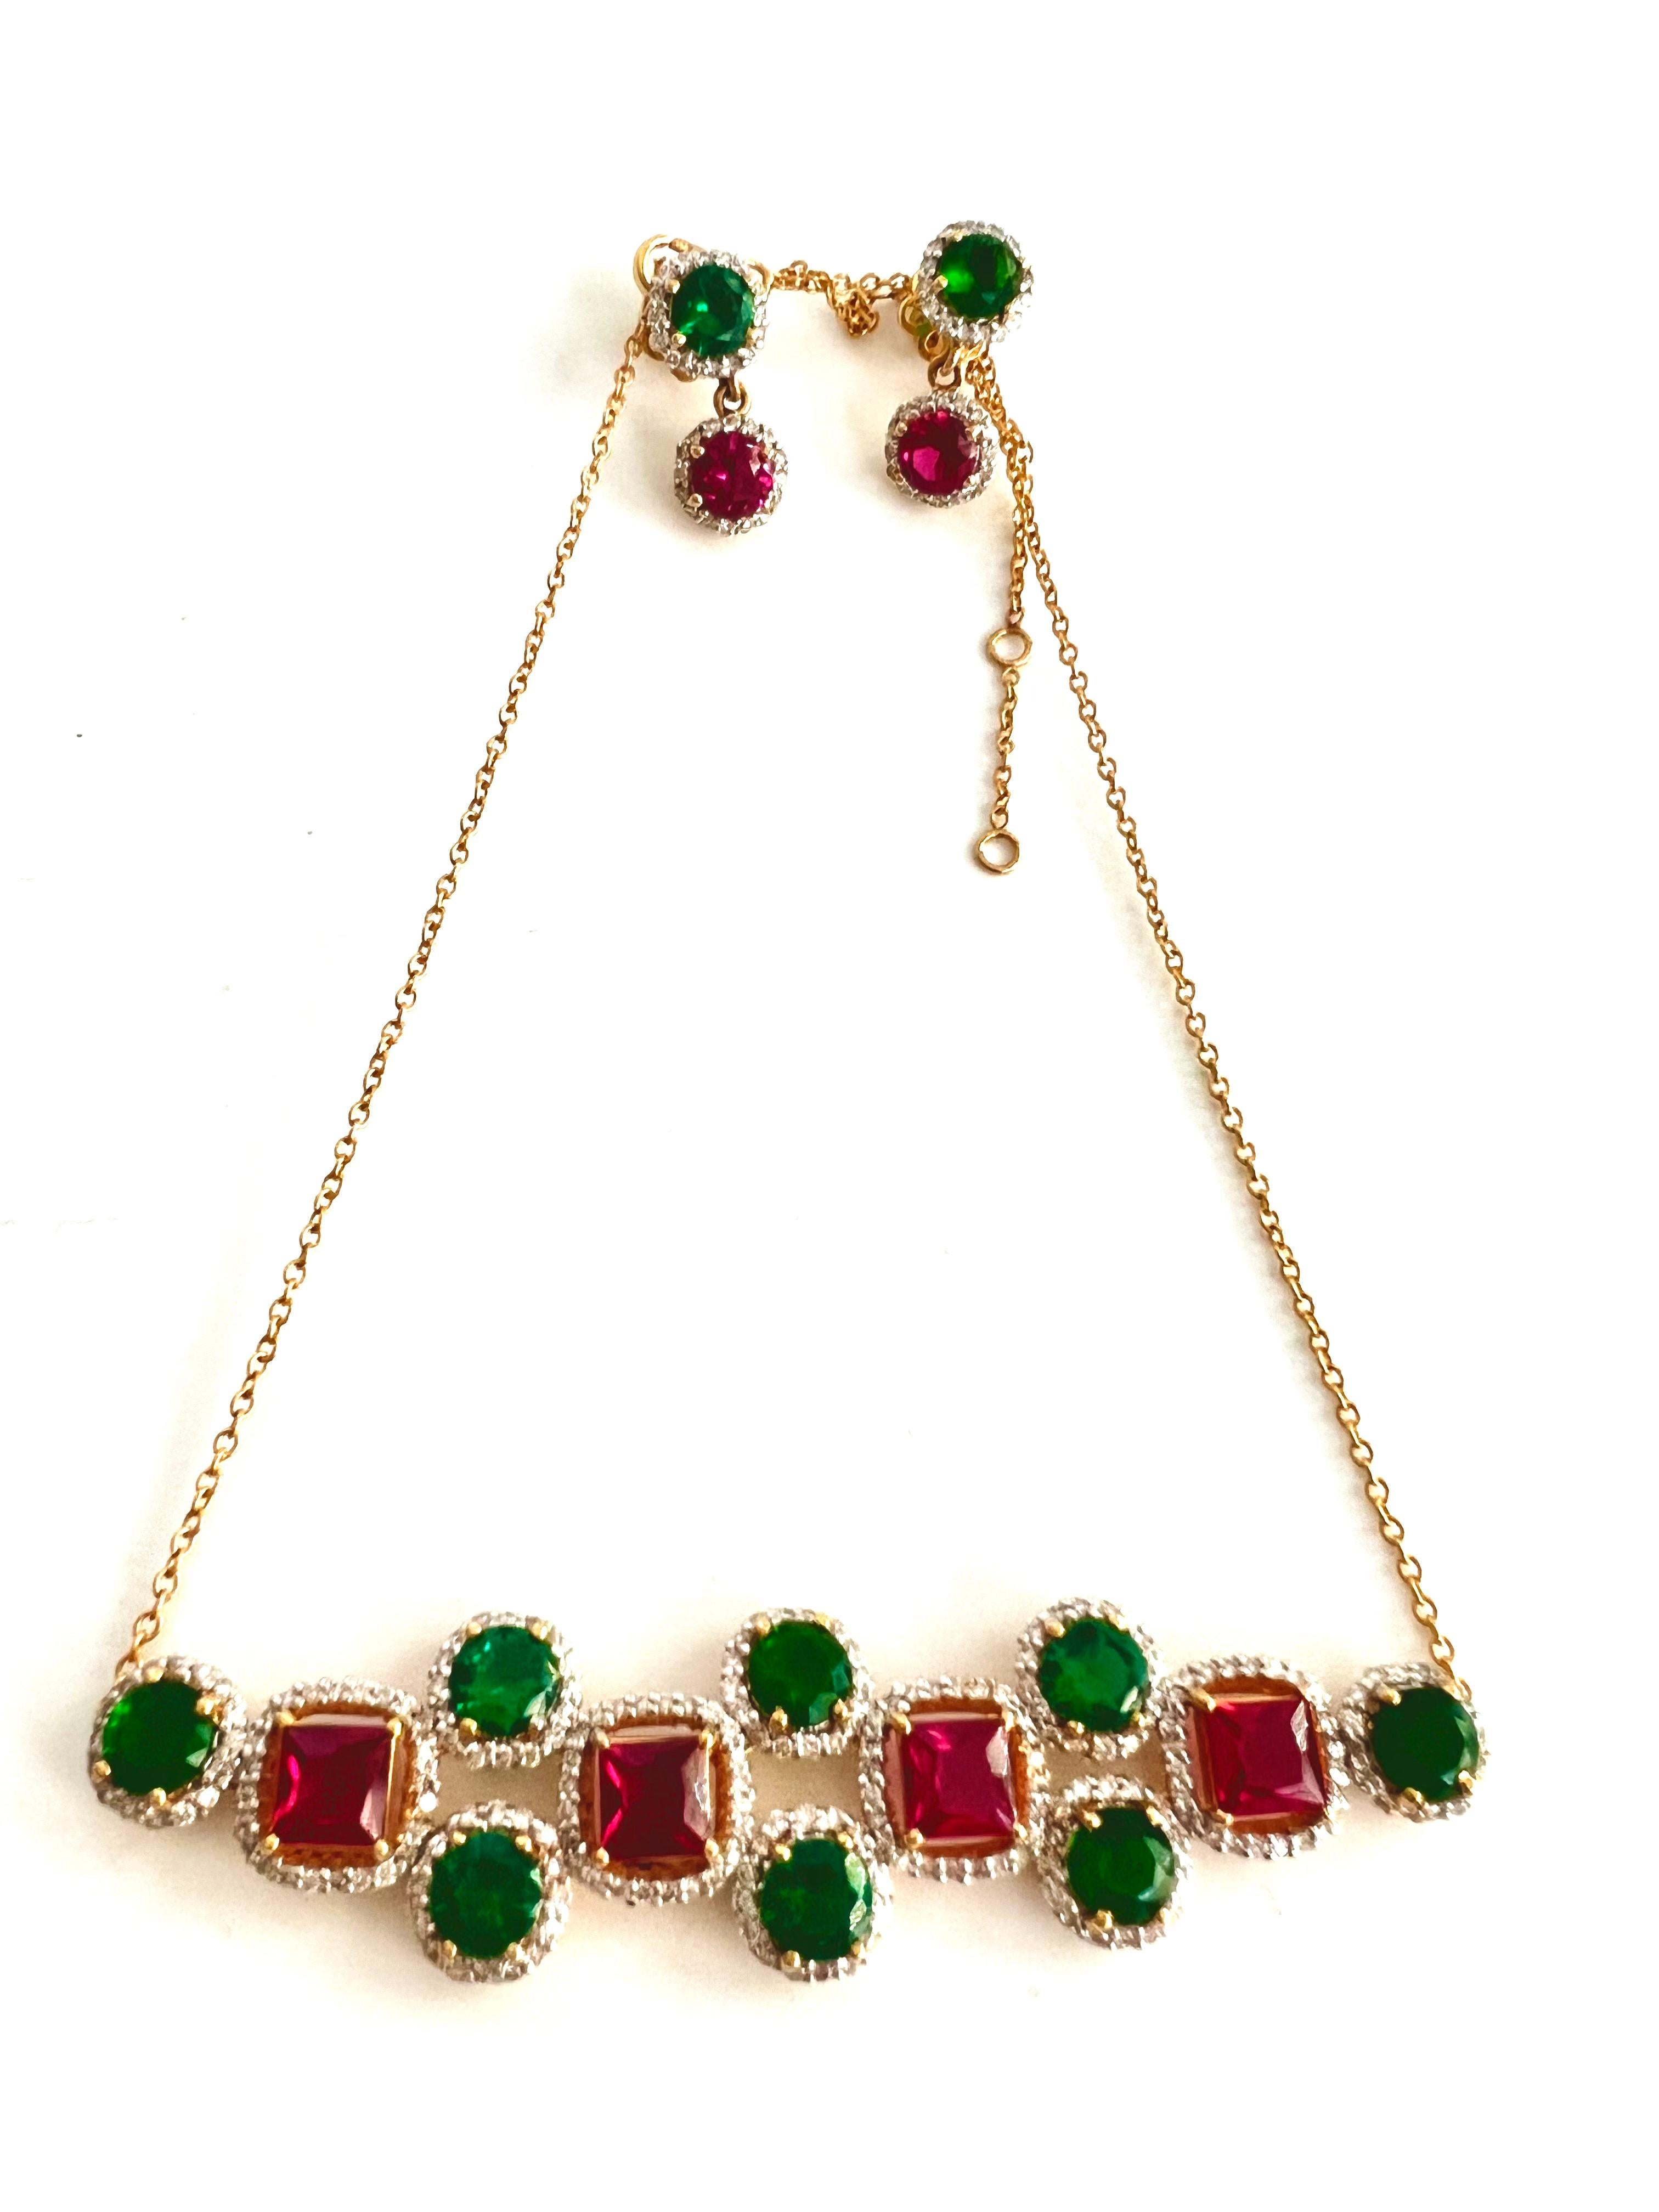 This gorgeous and chic cherry diamond choker necklace showcases sparkling diamonds and with synthetic rubies and emeralds set in 18k yellow gold.
Earrings shown here are not included and are sold separately.
choker part = 3